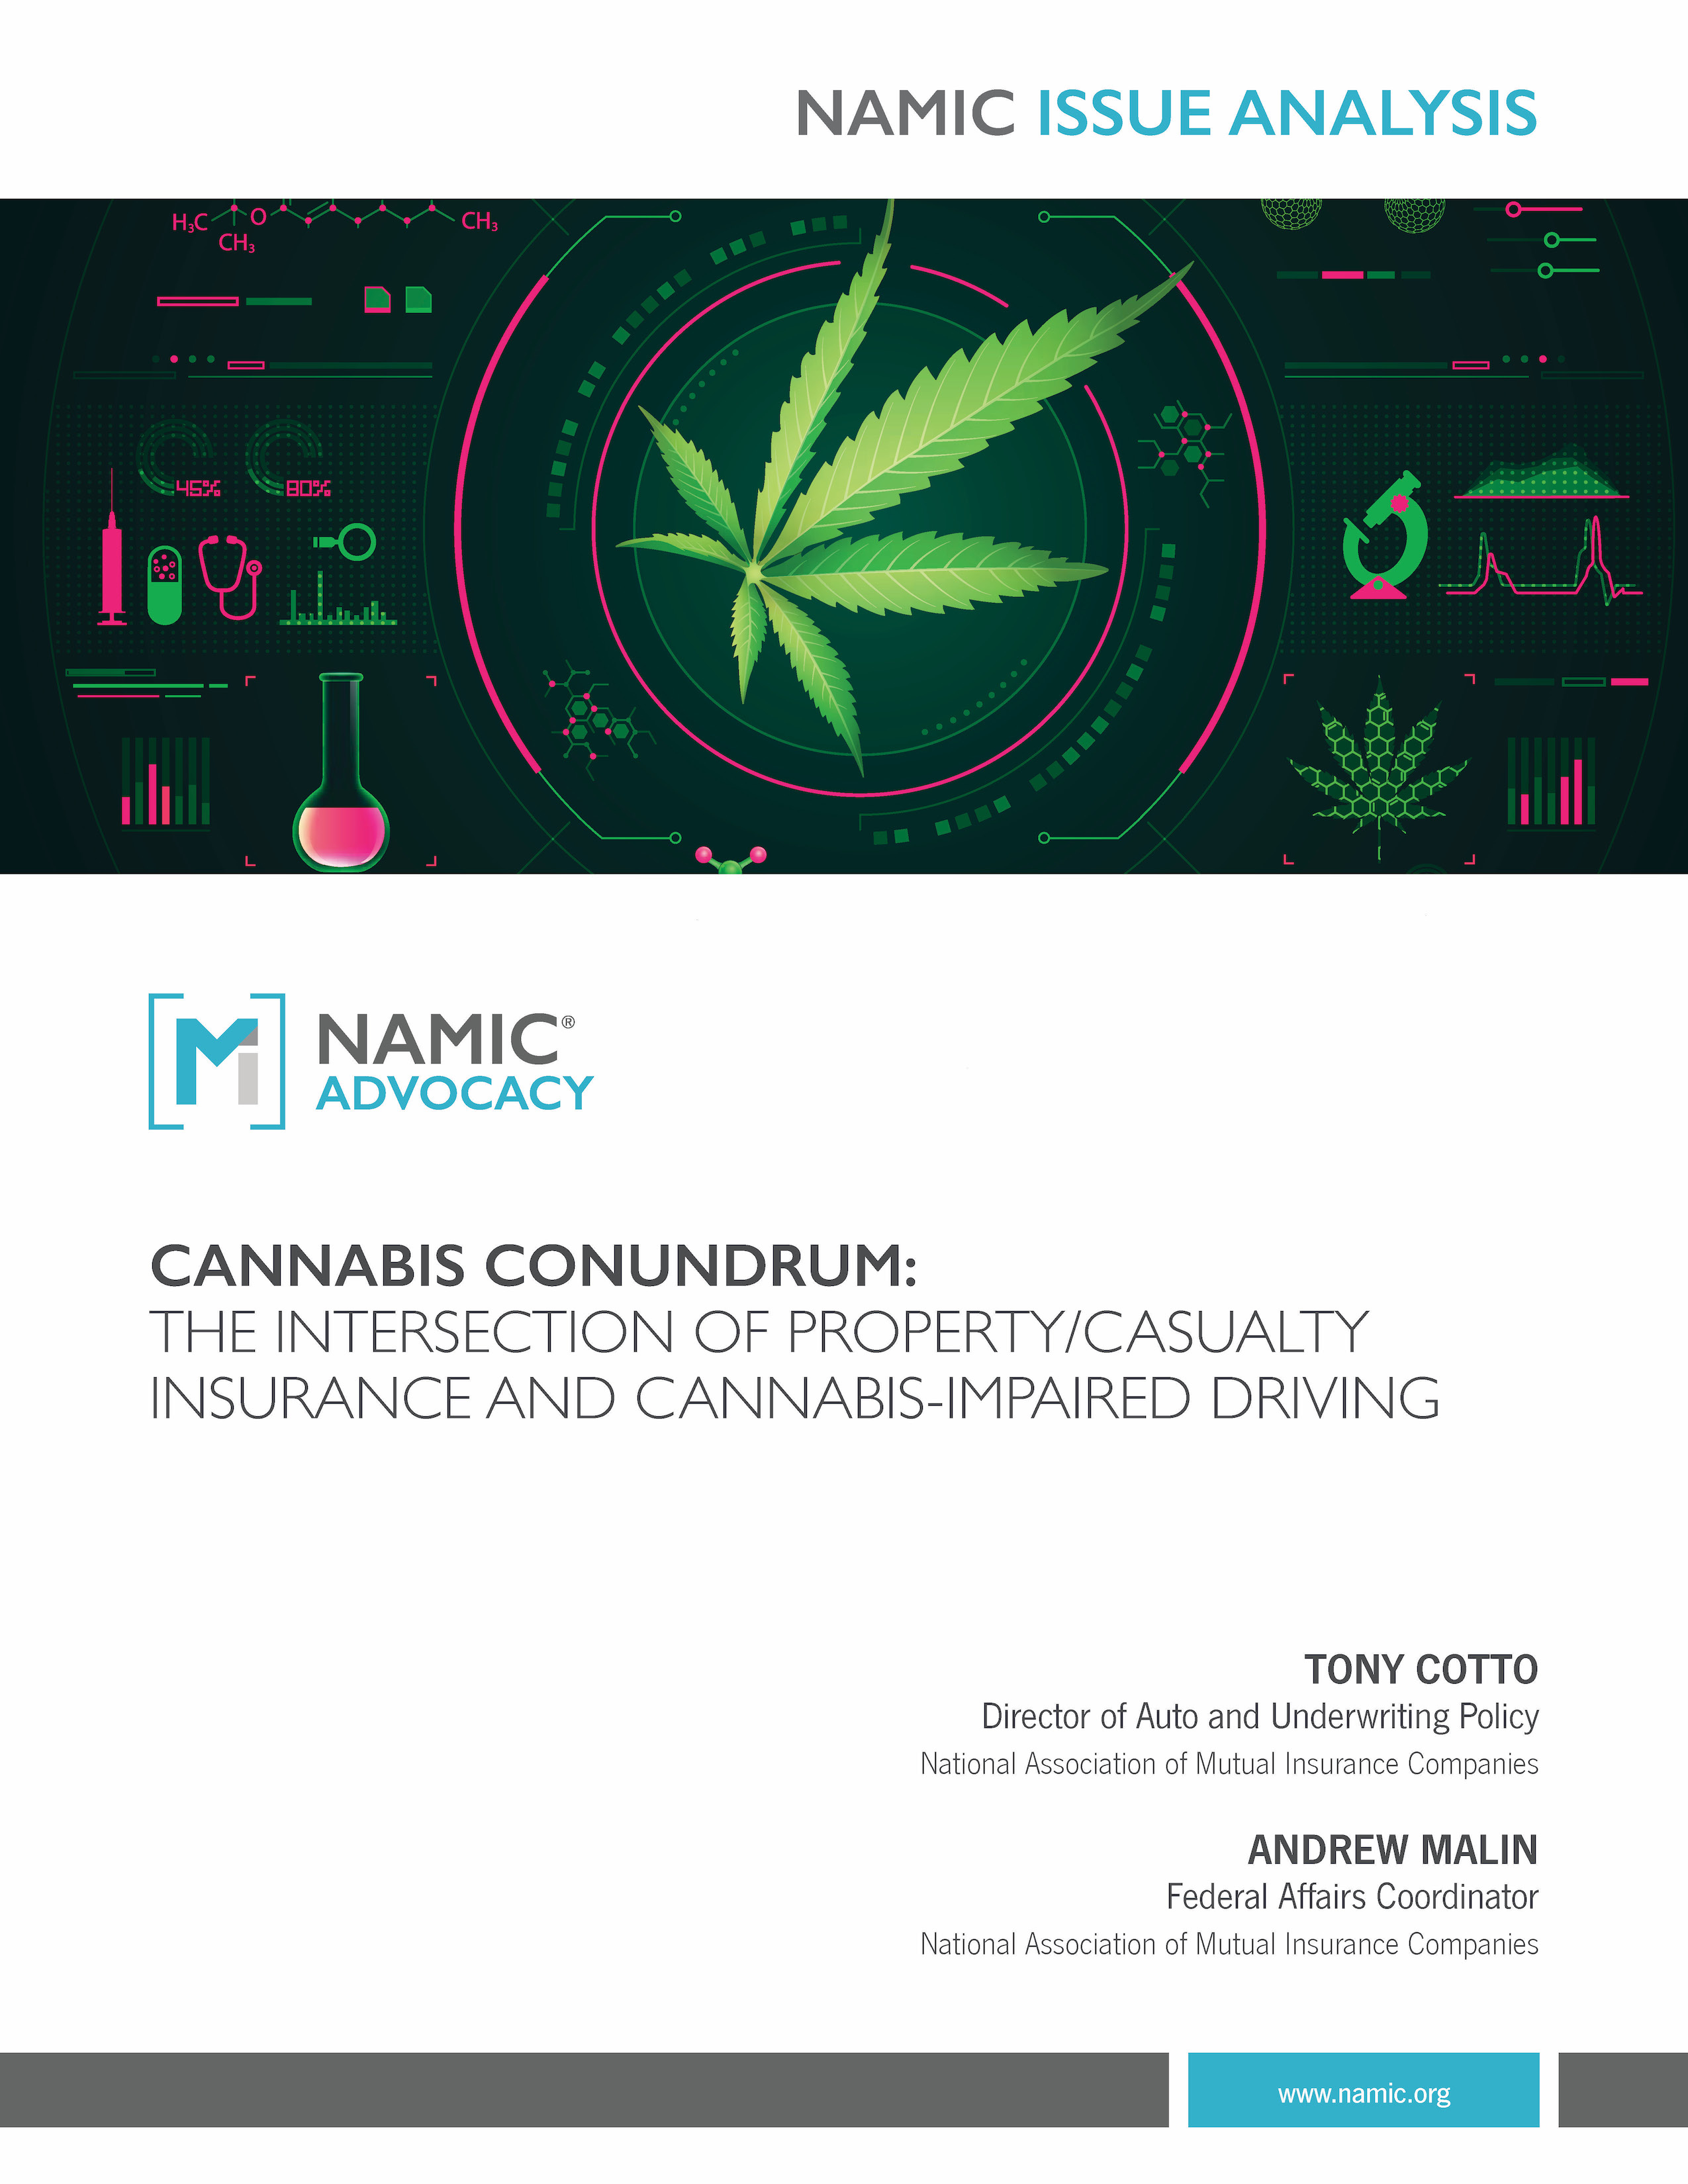  Cannabis Conundrum: The Intersection of Property/Casualty Insurance and Cannabis-Impaired Driving PDF